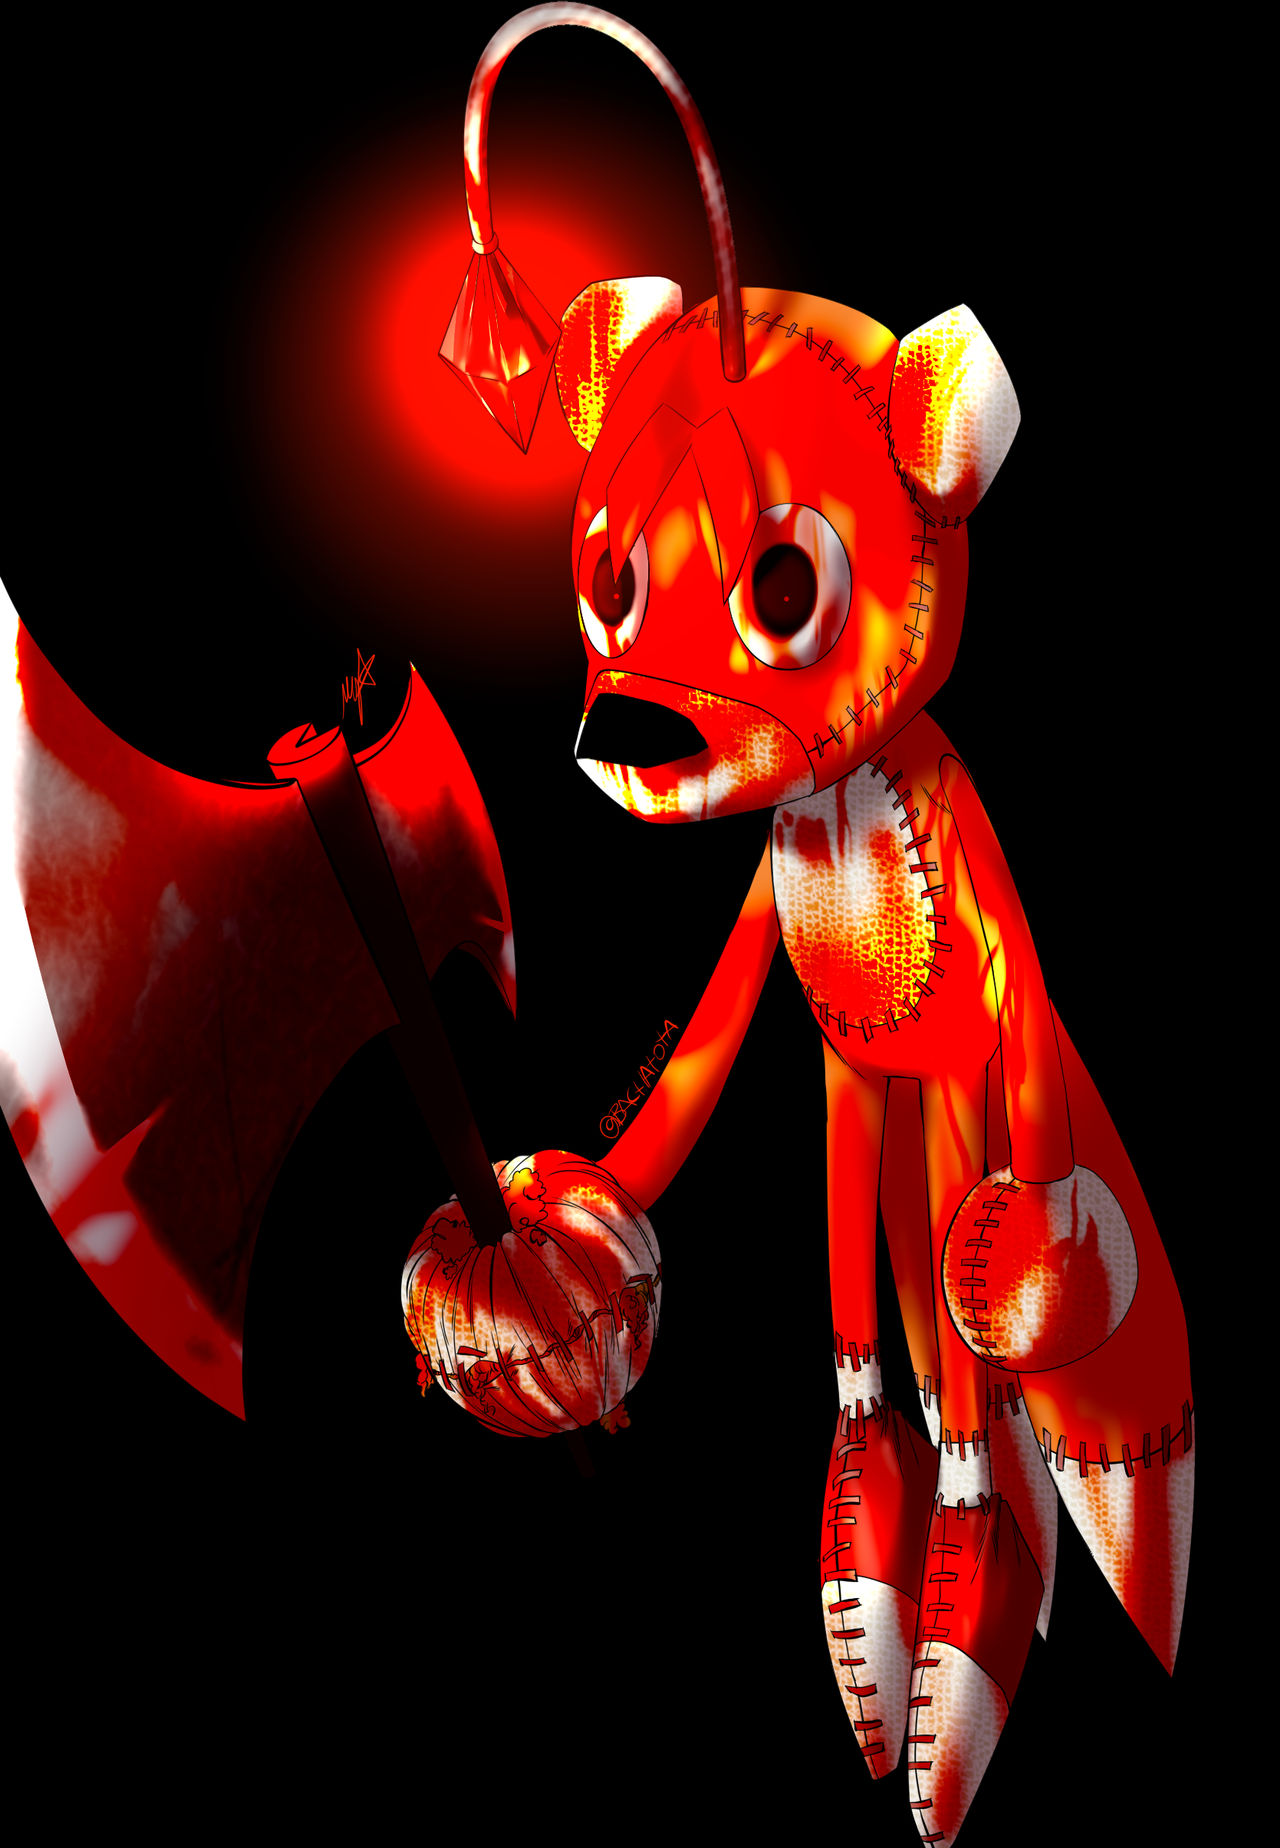 FNF] Corrupted Tails Doll by 205tob on DeviantArt